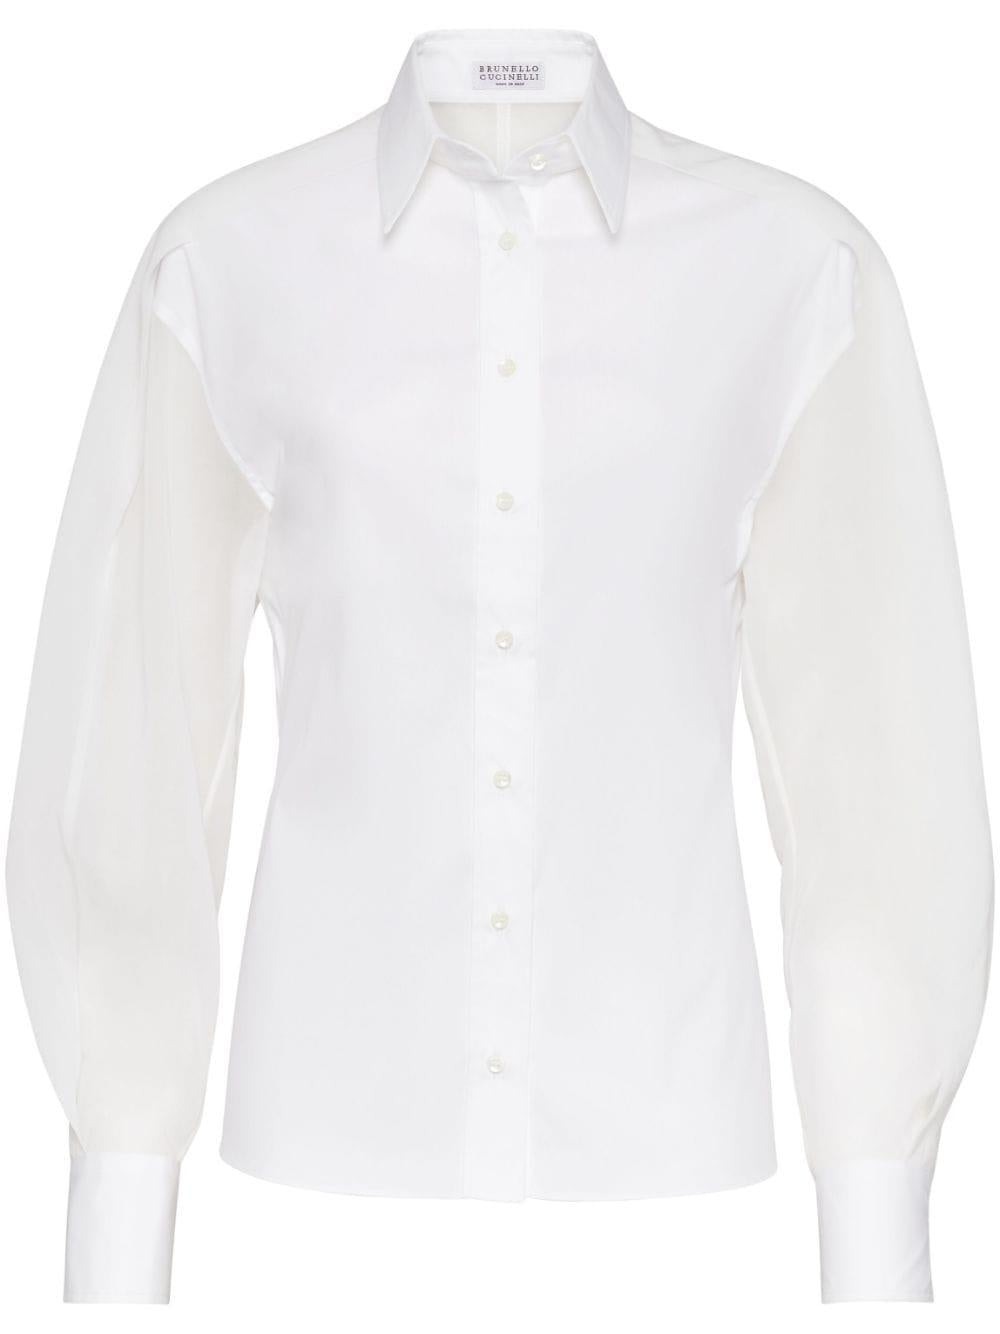 Shop Brunello Cucinelli Stunning White Stretch Cotton Poplin Shirt With Light Knit Sleeves And Necklace